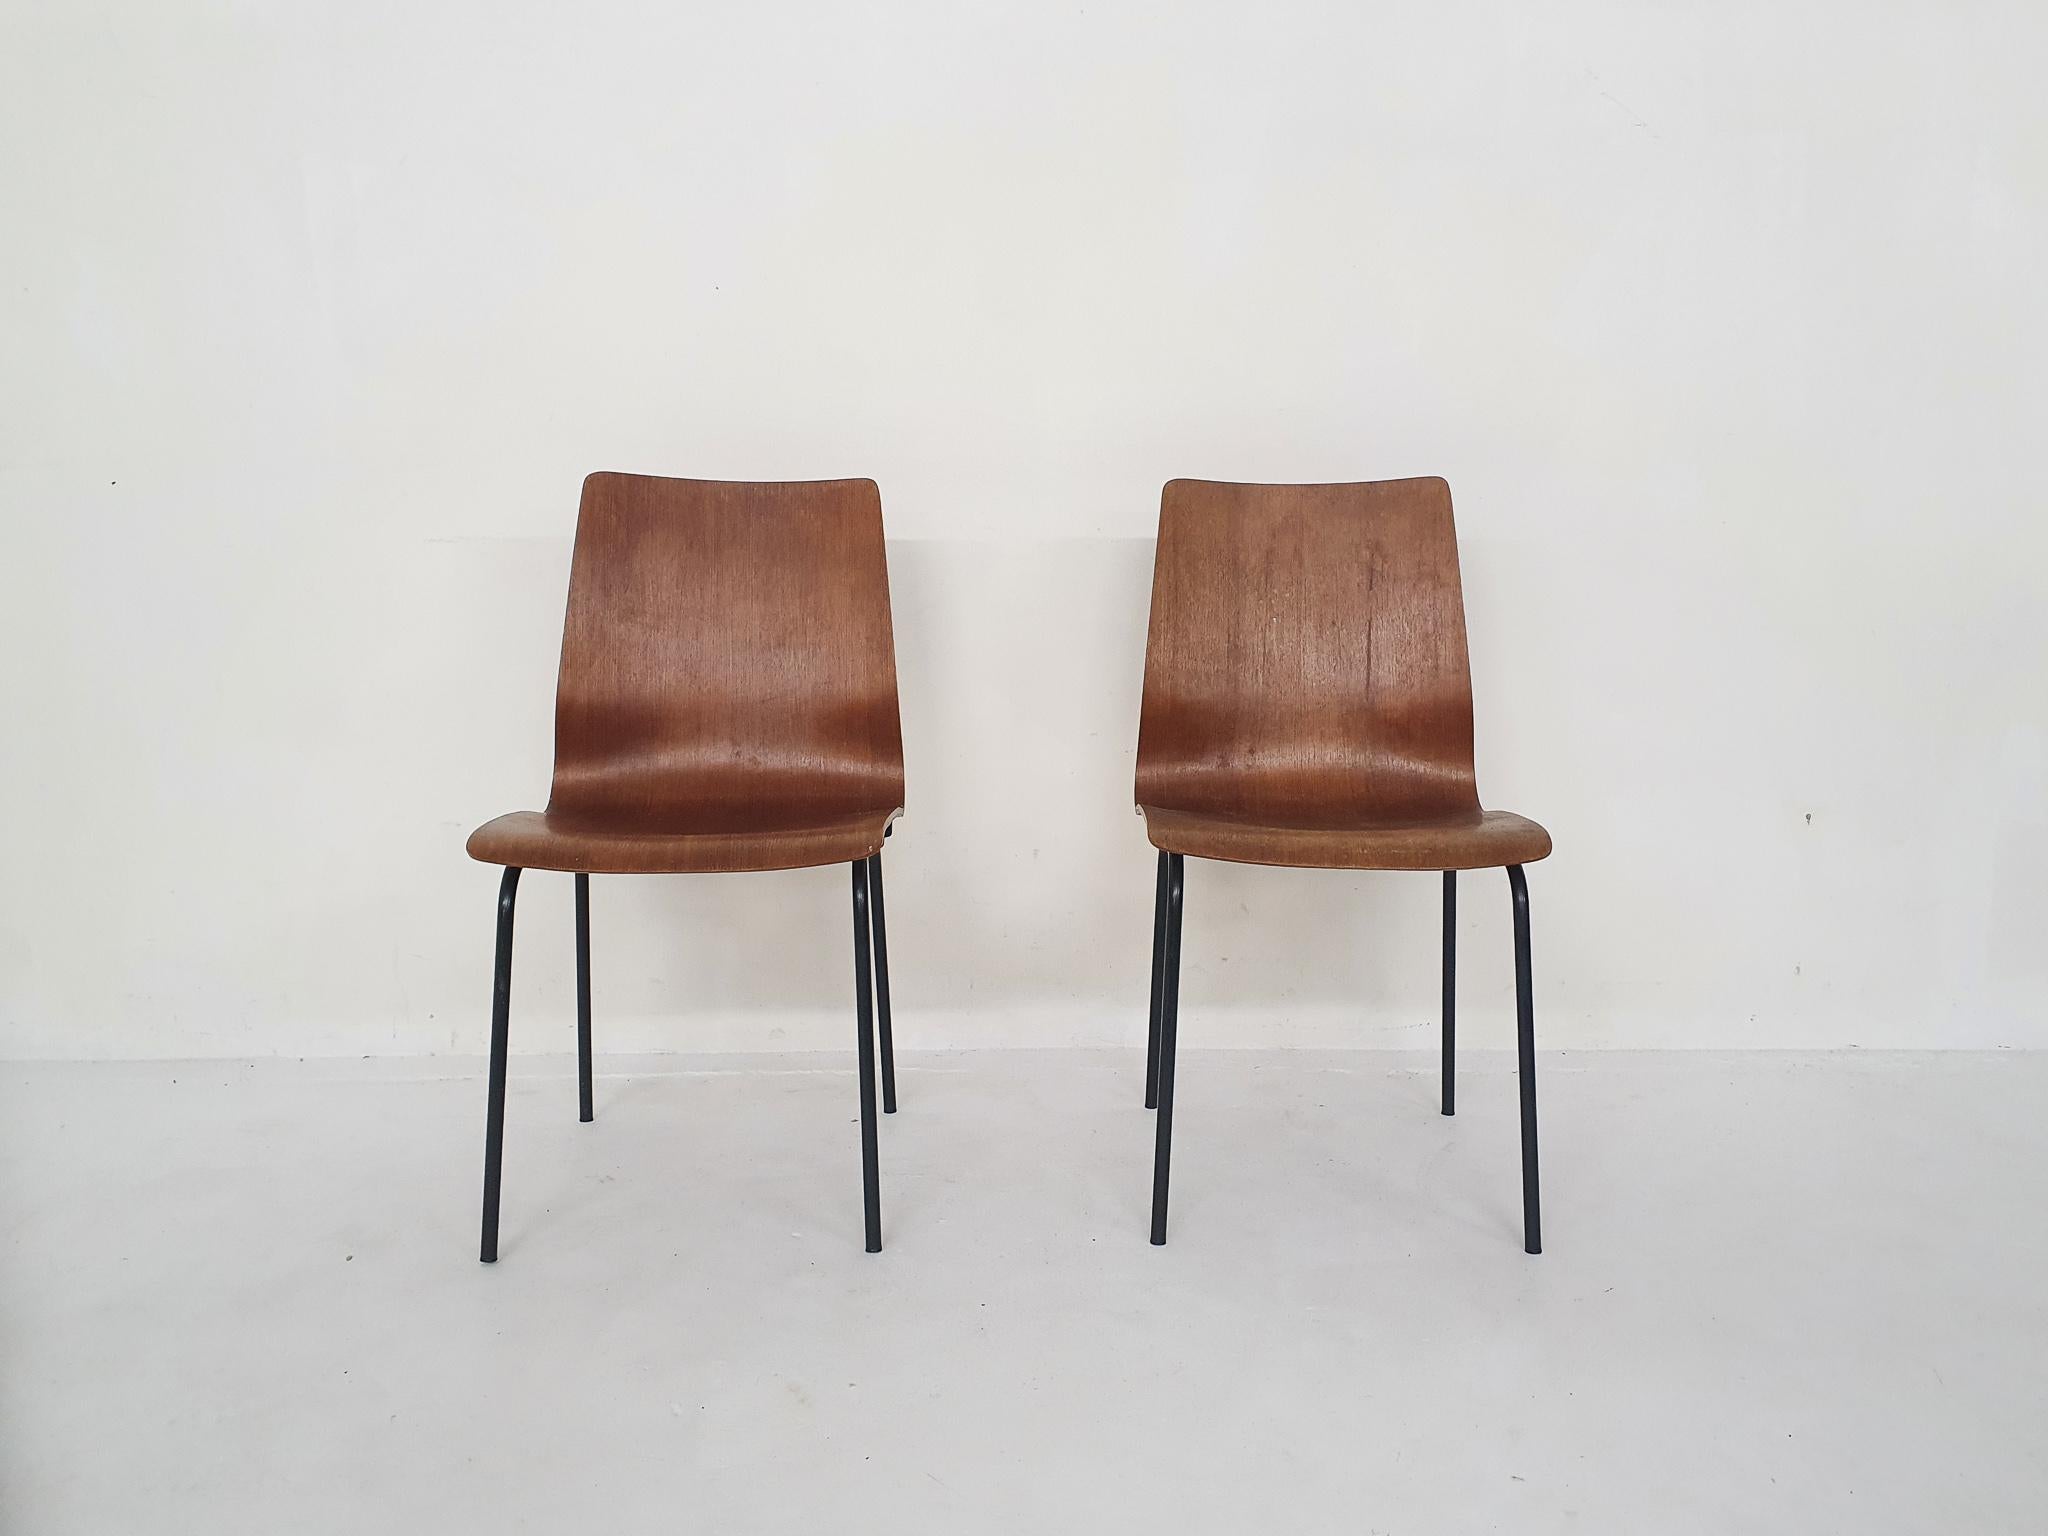 Teak plywood dining chair on black metal base.
Some small veneer damages at the back of one chair.
Friso Kramer is the son of architect Piet Kramer. In 1963 he founded, together with Wim Crouwel, Benno Wissing, Paul and Dick Schwarz Total Design.